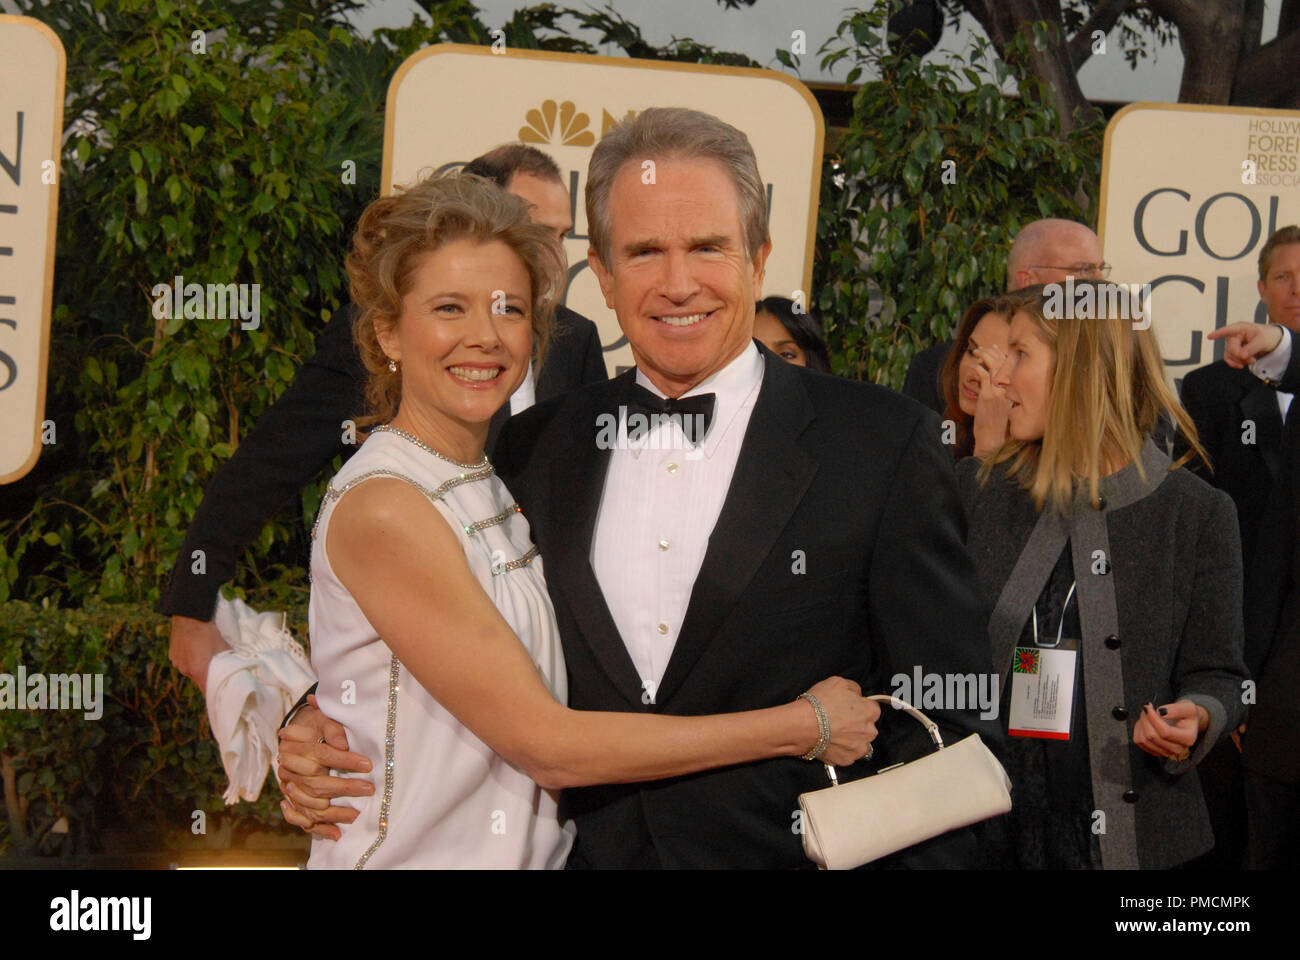 Hollywood Foreign Press Association presents the 2007 'Golden Globe Awards - 64th Annual' (Arrivals) Annette Bening, Warren Beatty 1-15-07 Stock Photo